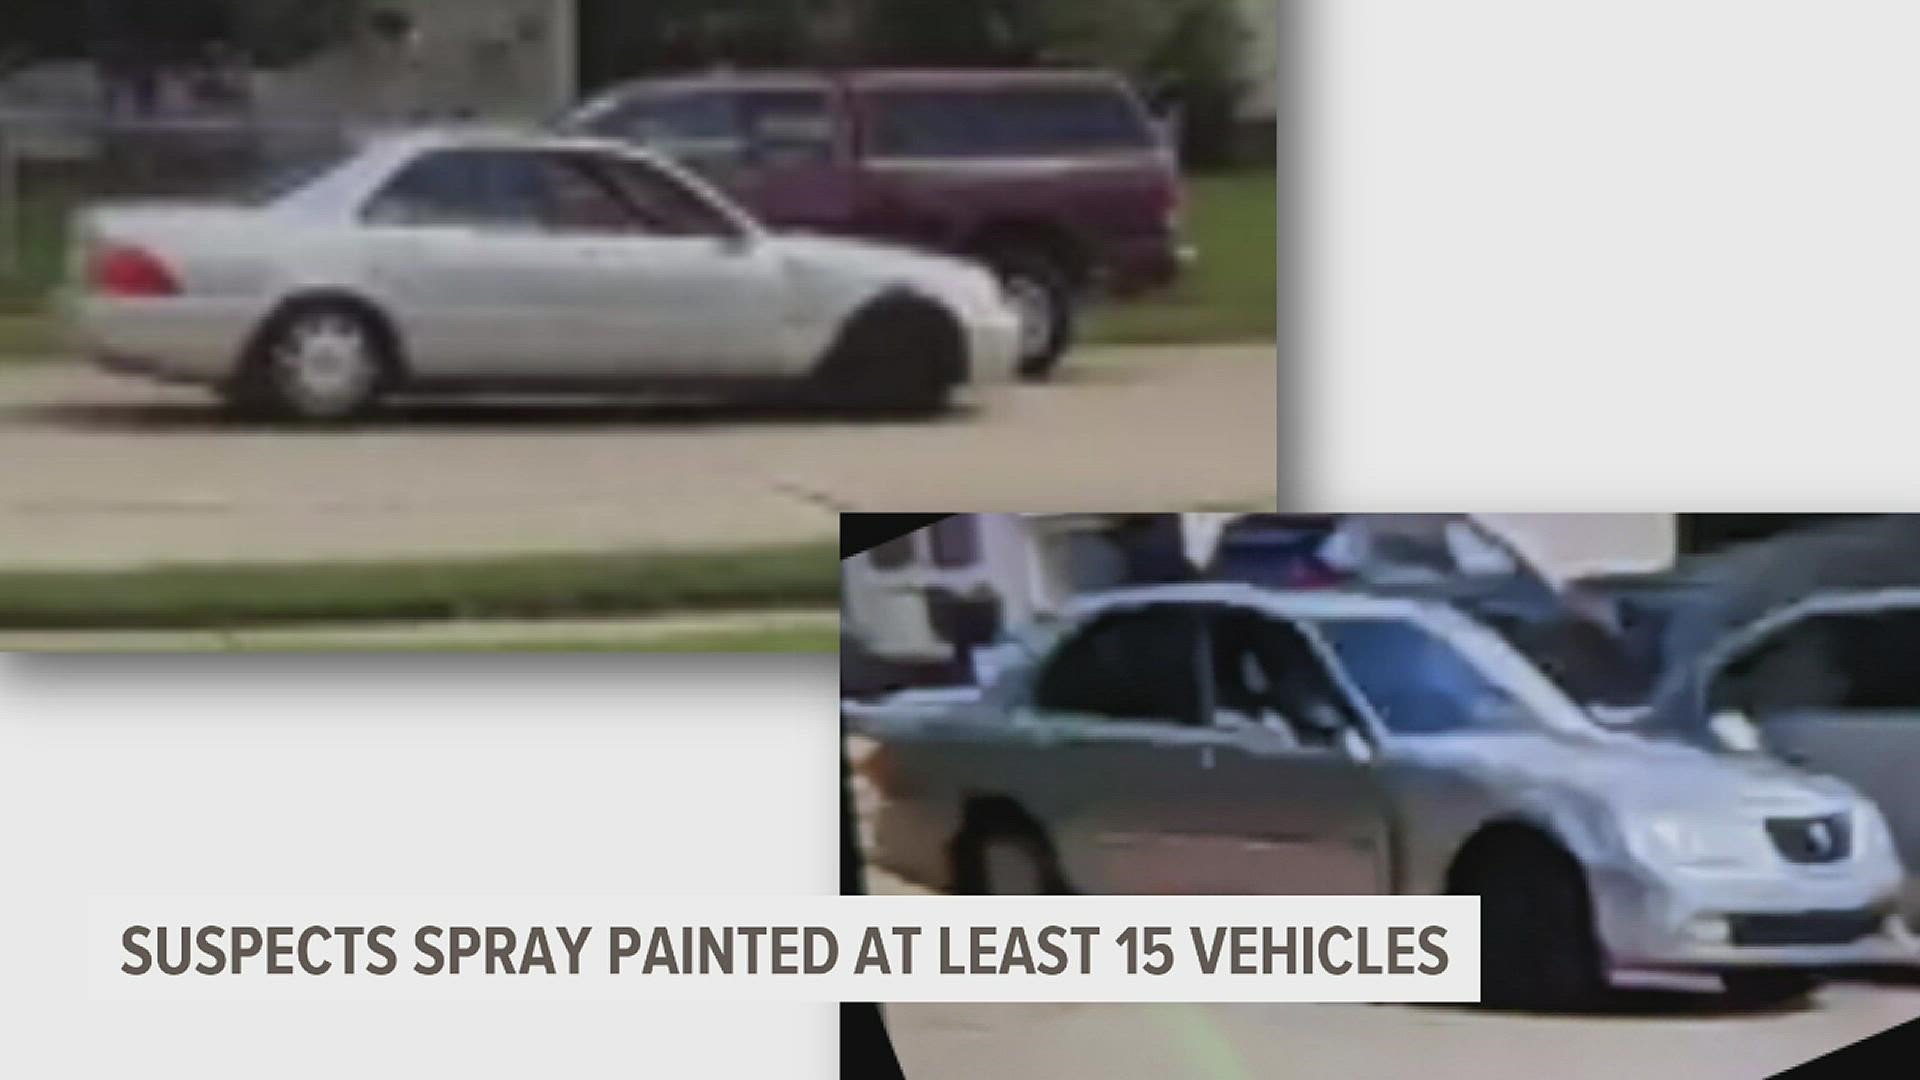 DPD is looking for a silver sedan that was reportedly used in an incident where someone drove erratically and spray-painted parked cars Sunday evening.